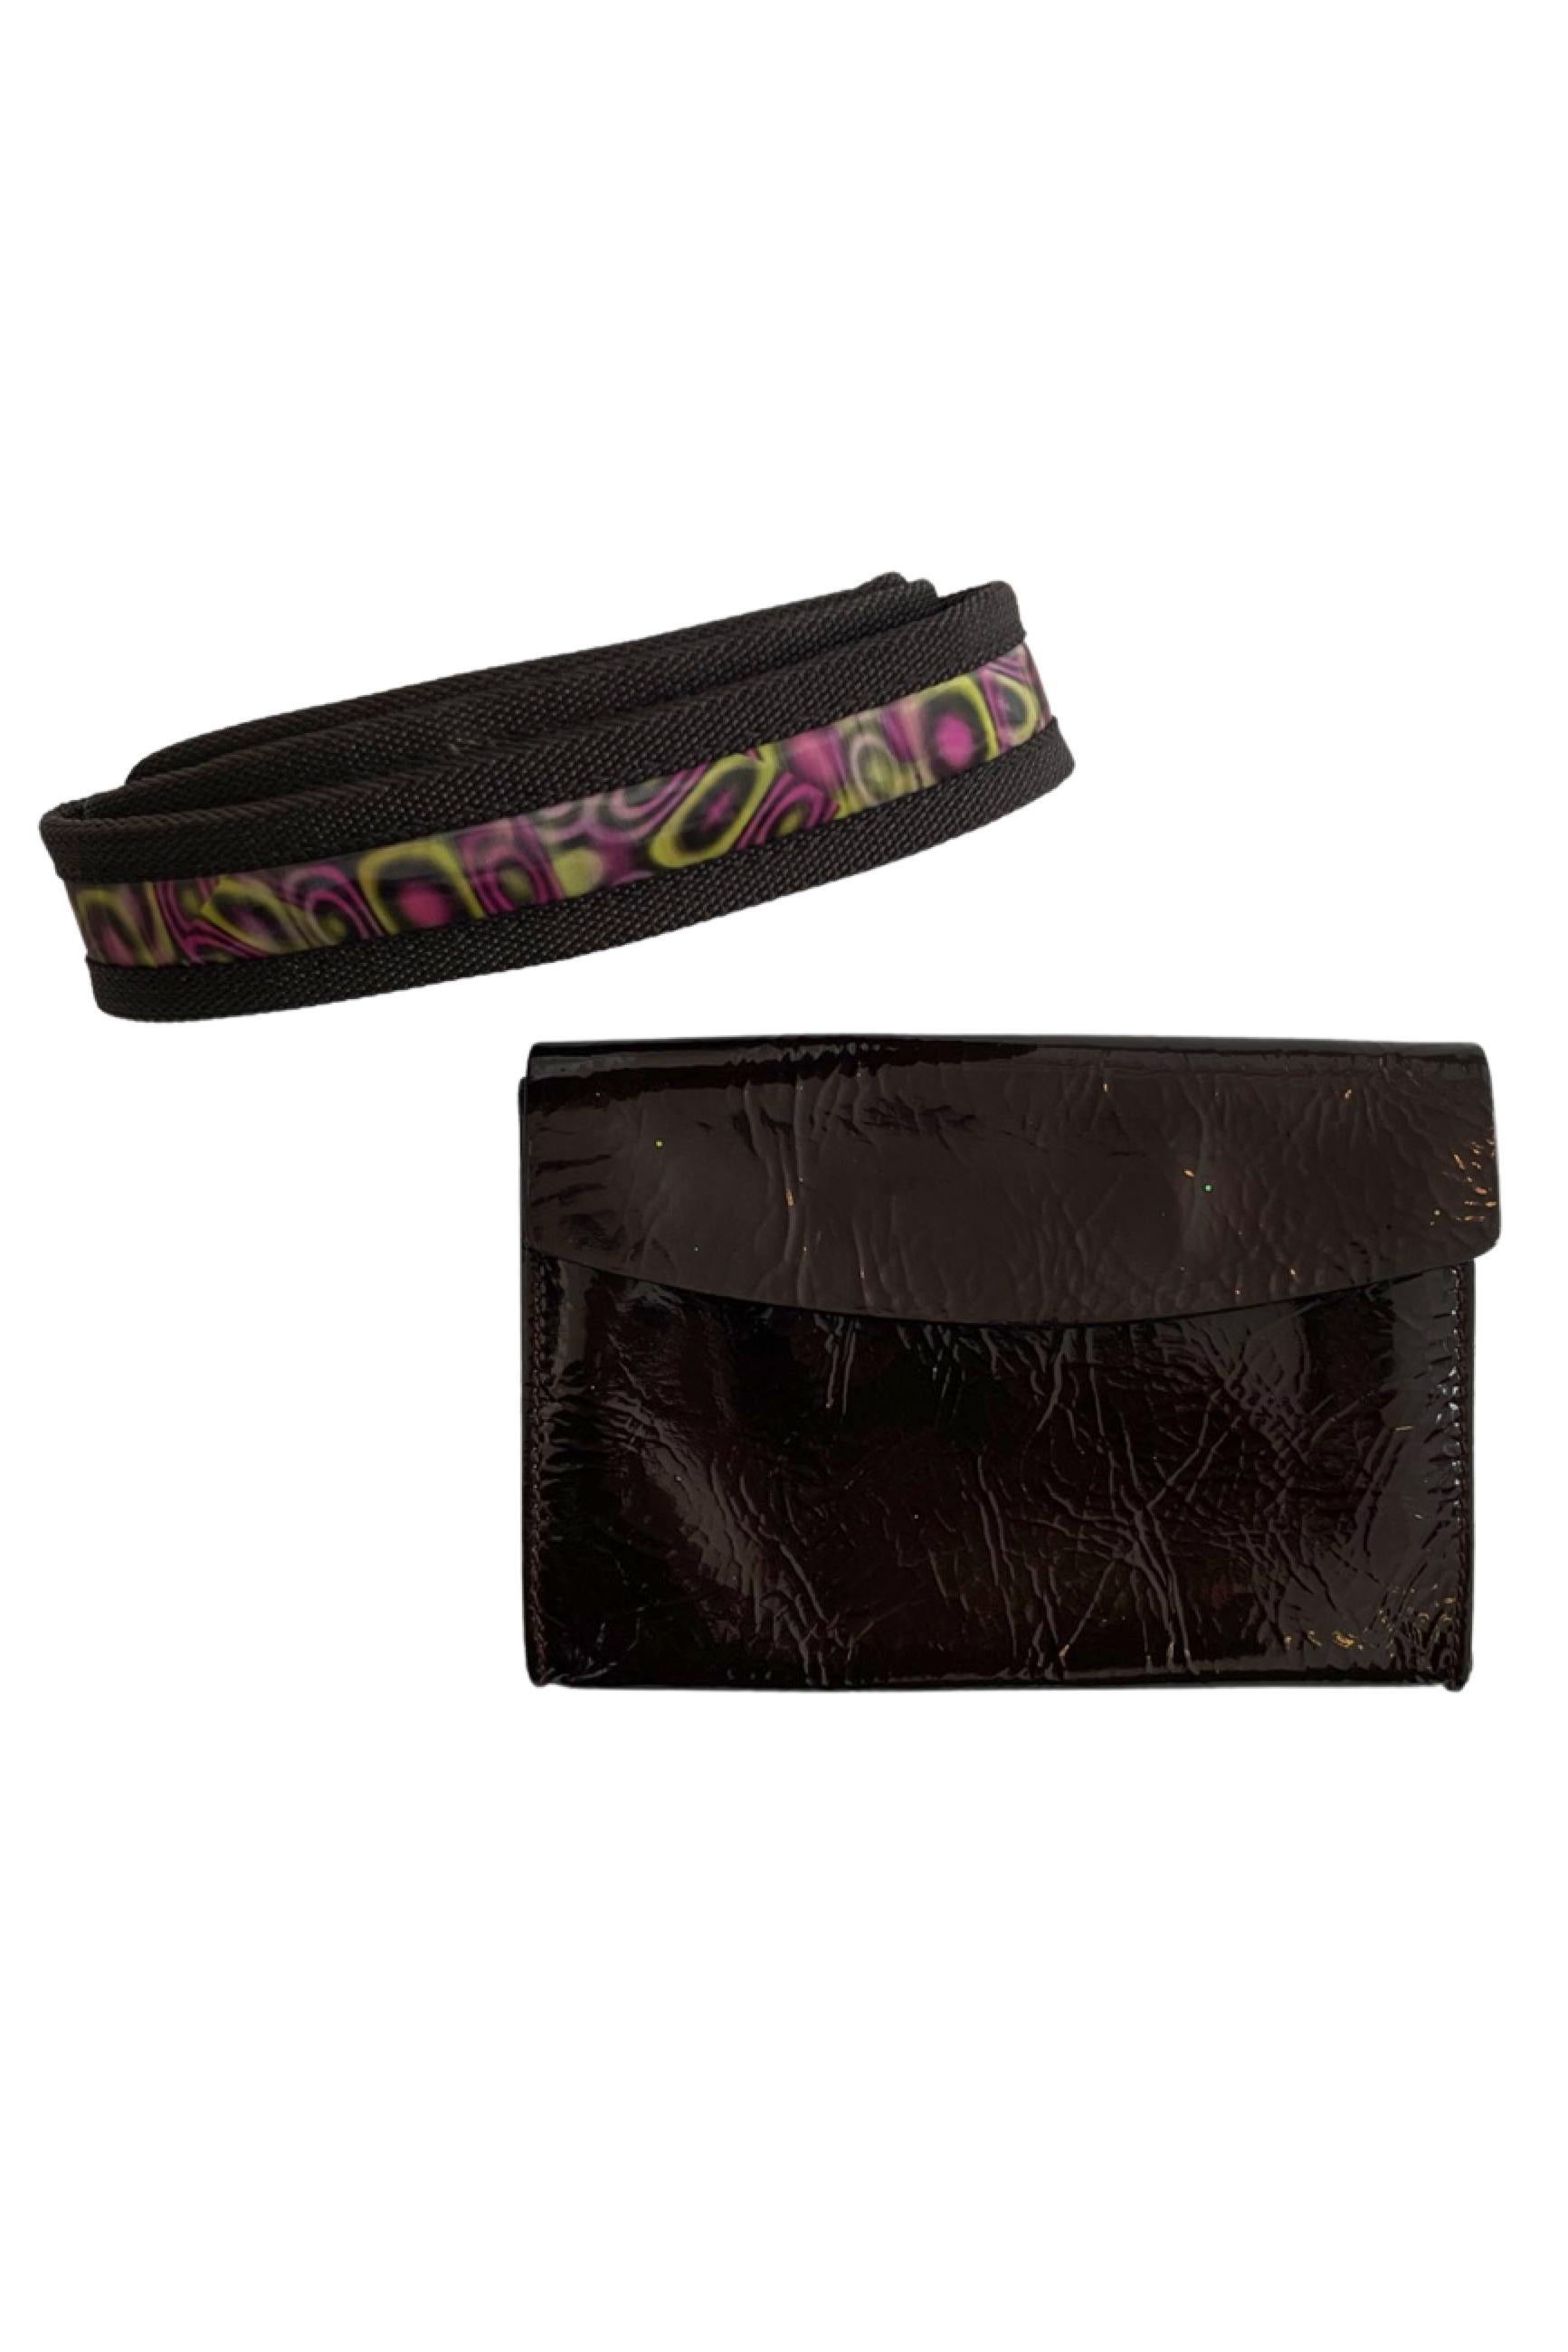 Miu Miu Brown Patent Leather Psychedelic Waist Bag Belt For Sale 1